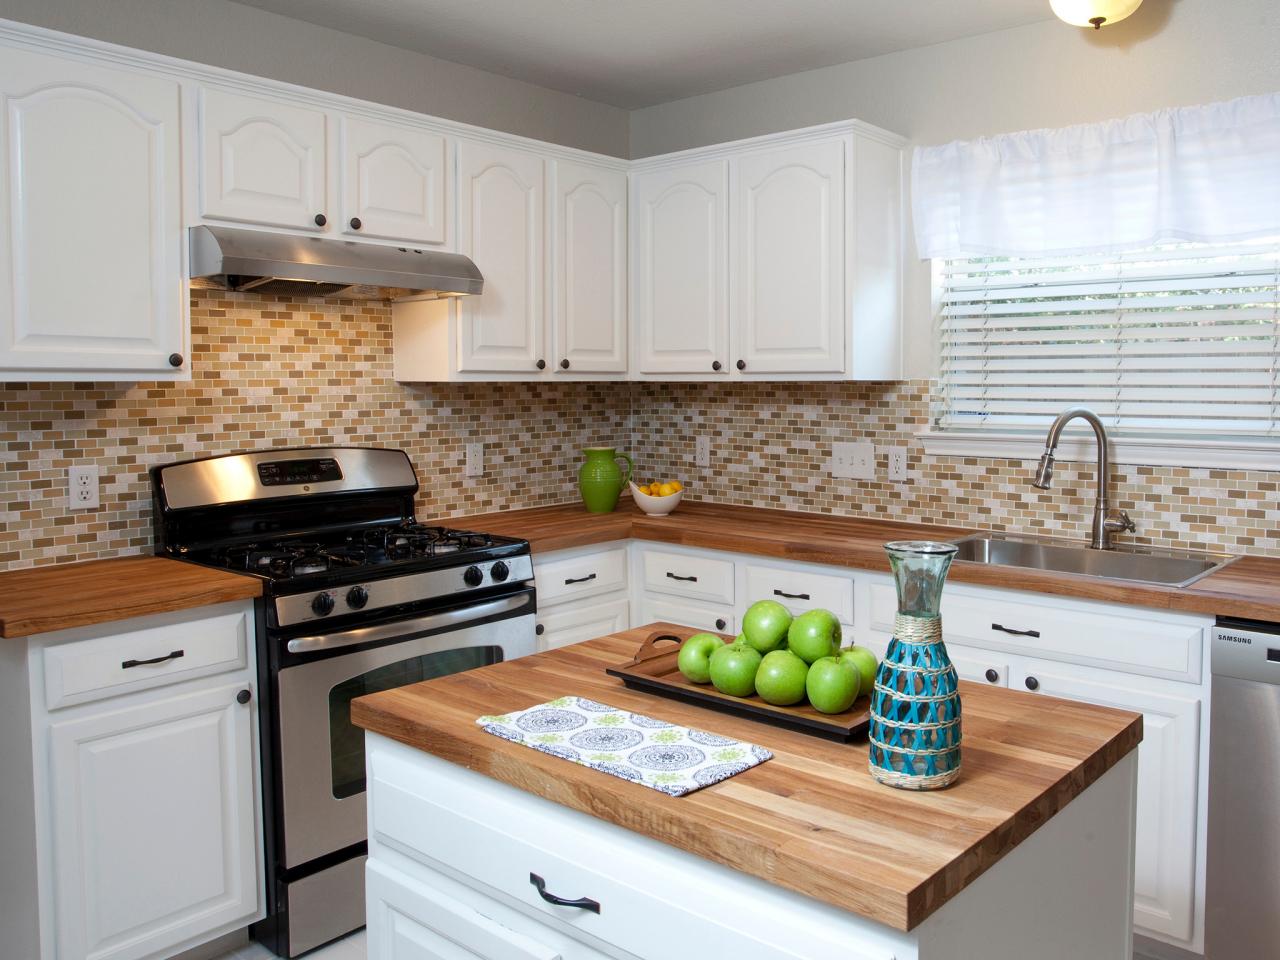 Wood Kitchen Countertops Pictures Ideas From HGTV HGTV